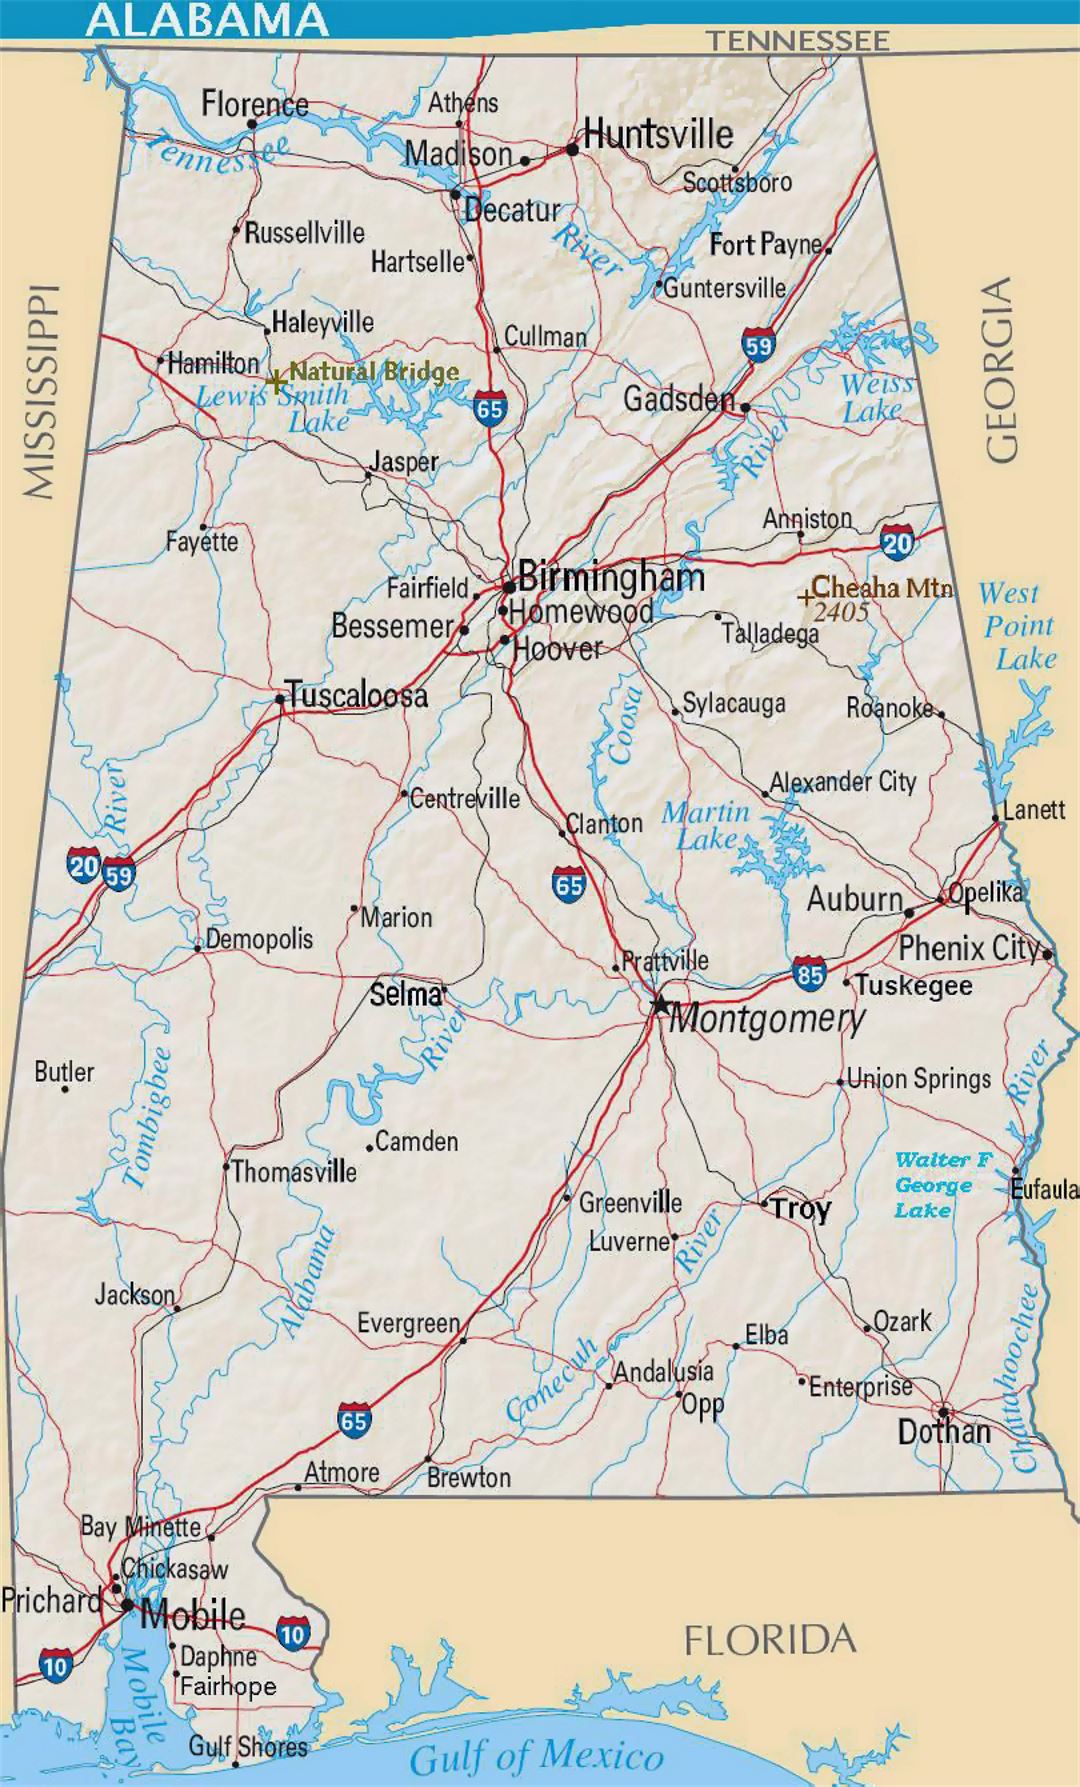 Detailed road map of Alabama state with relief and cities